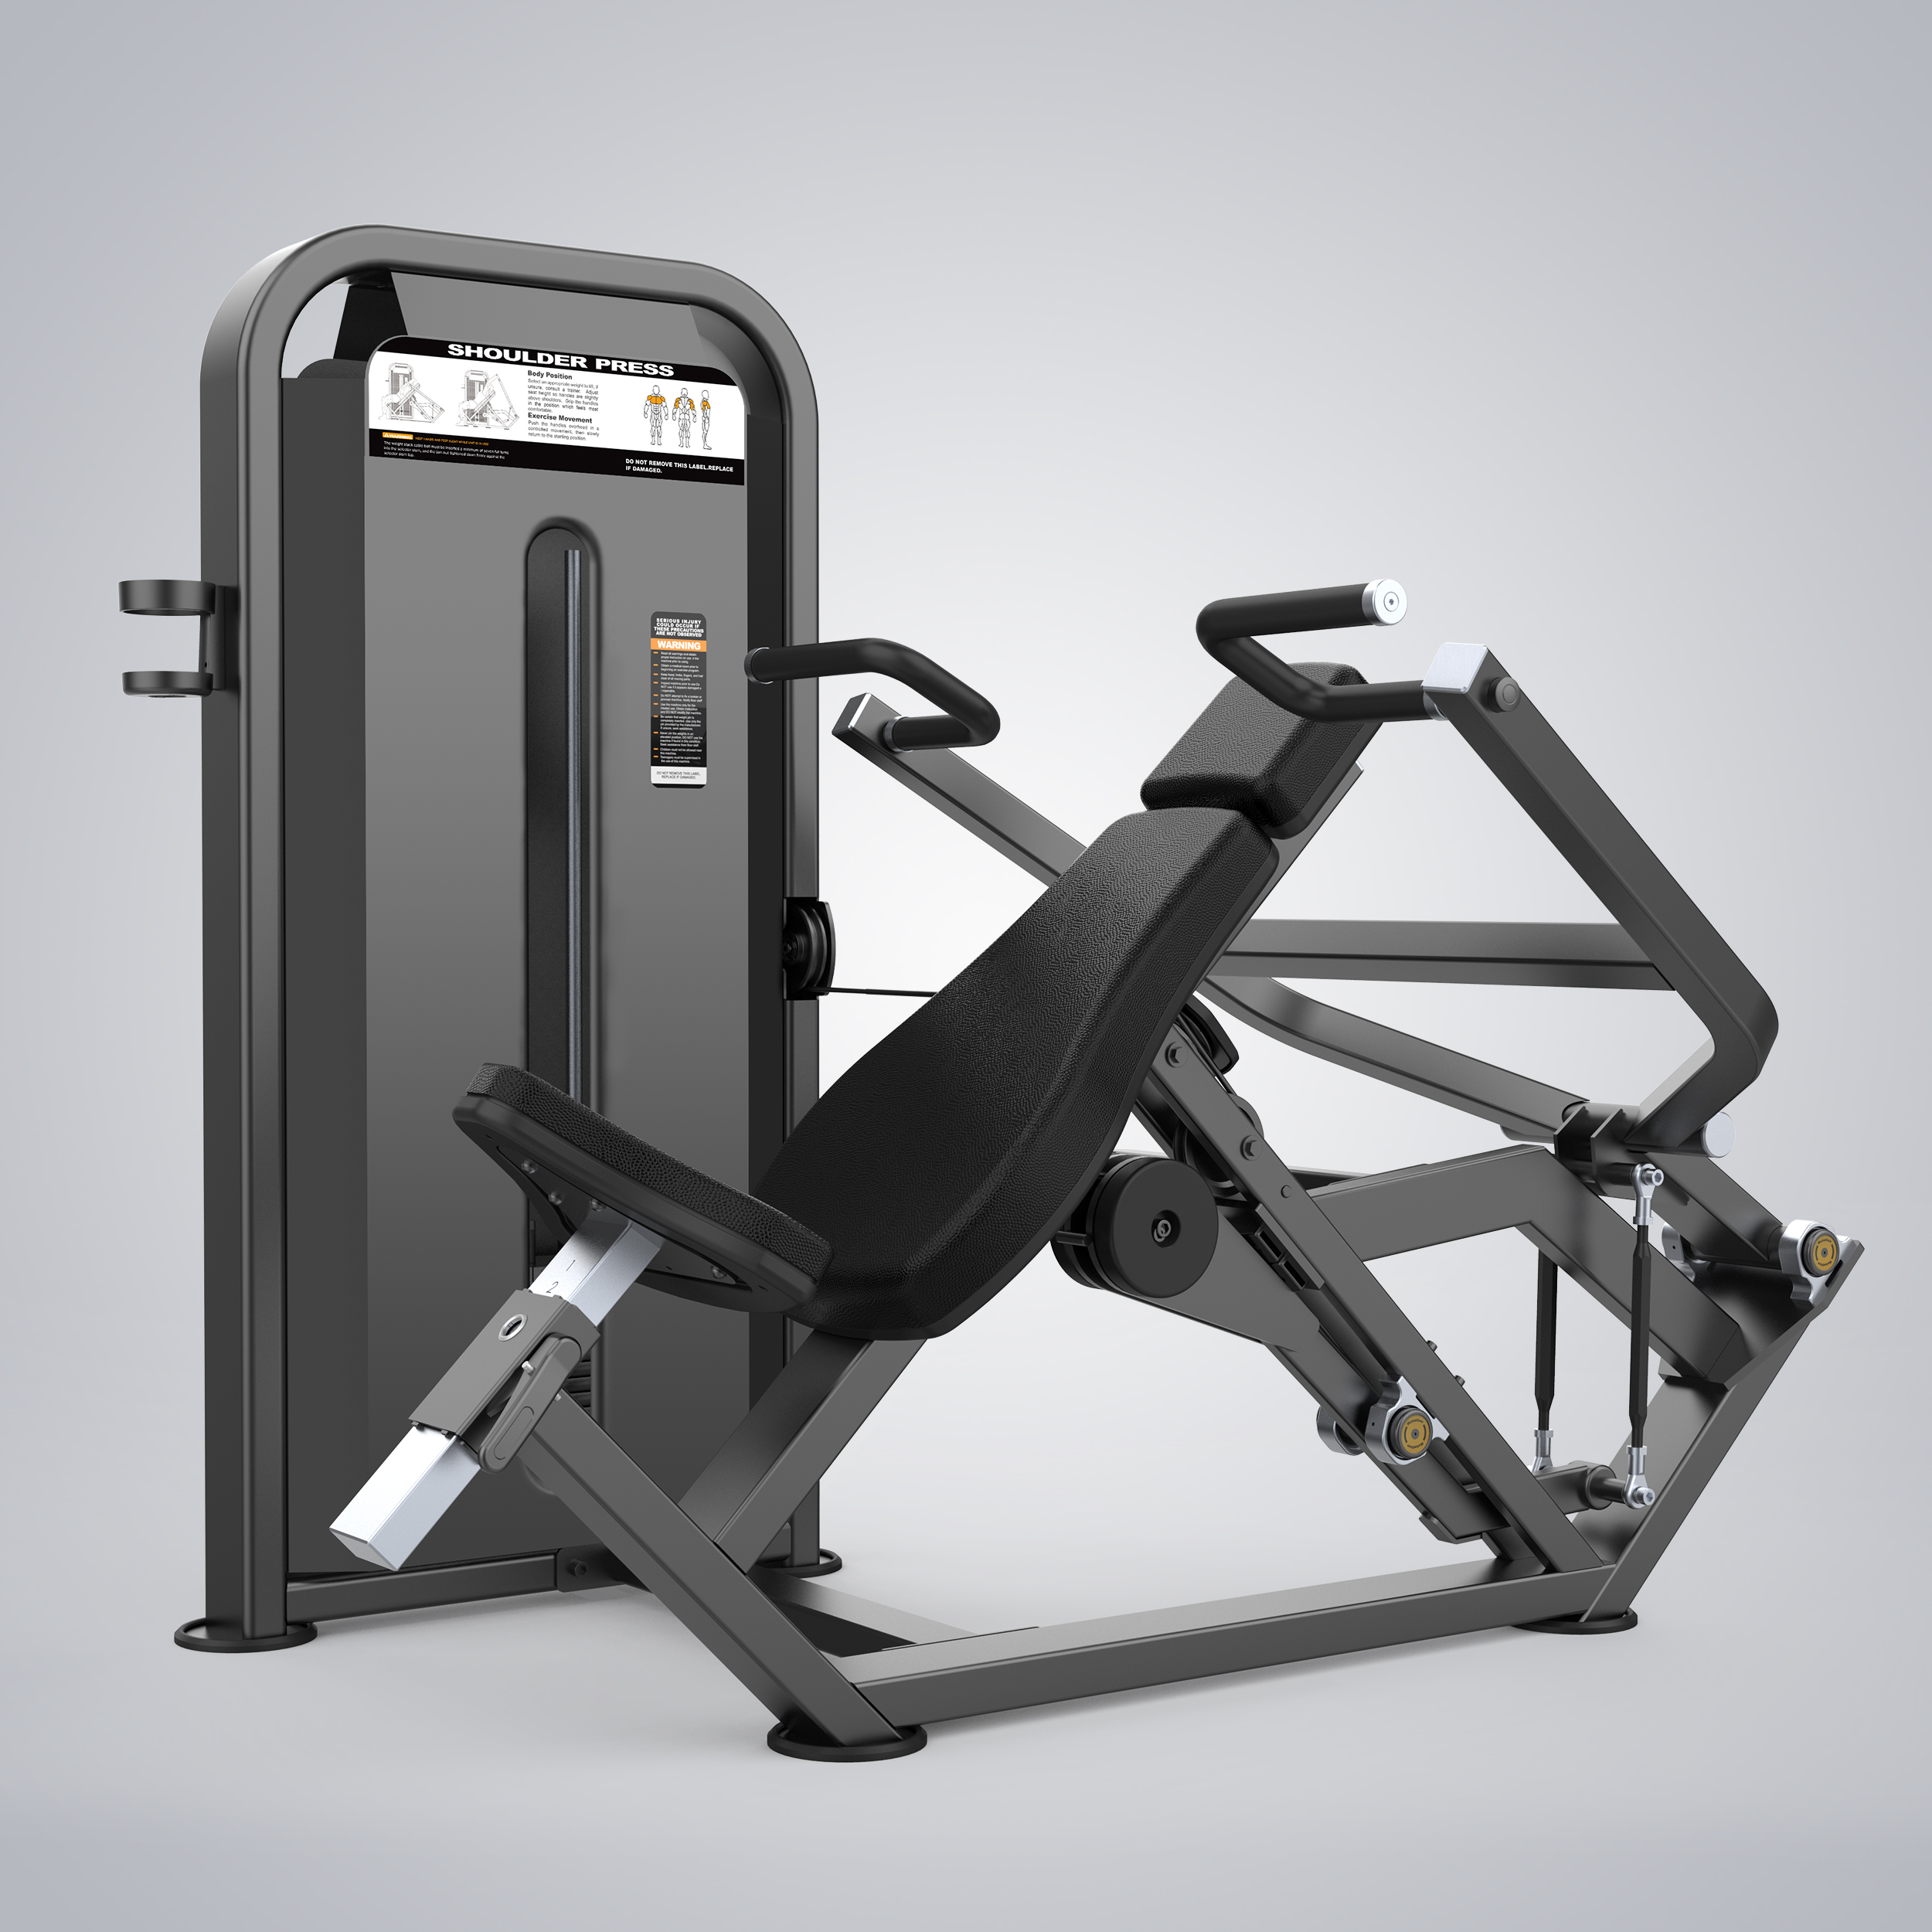 How and why: the shoulder press machine